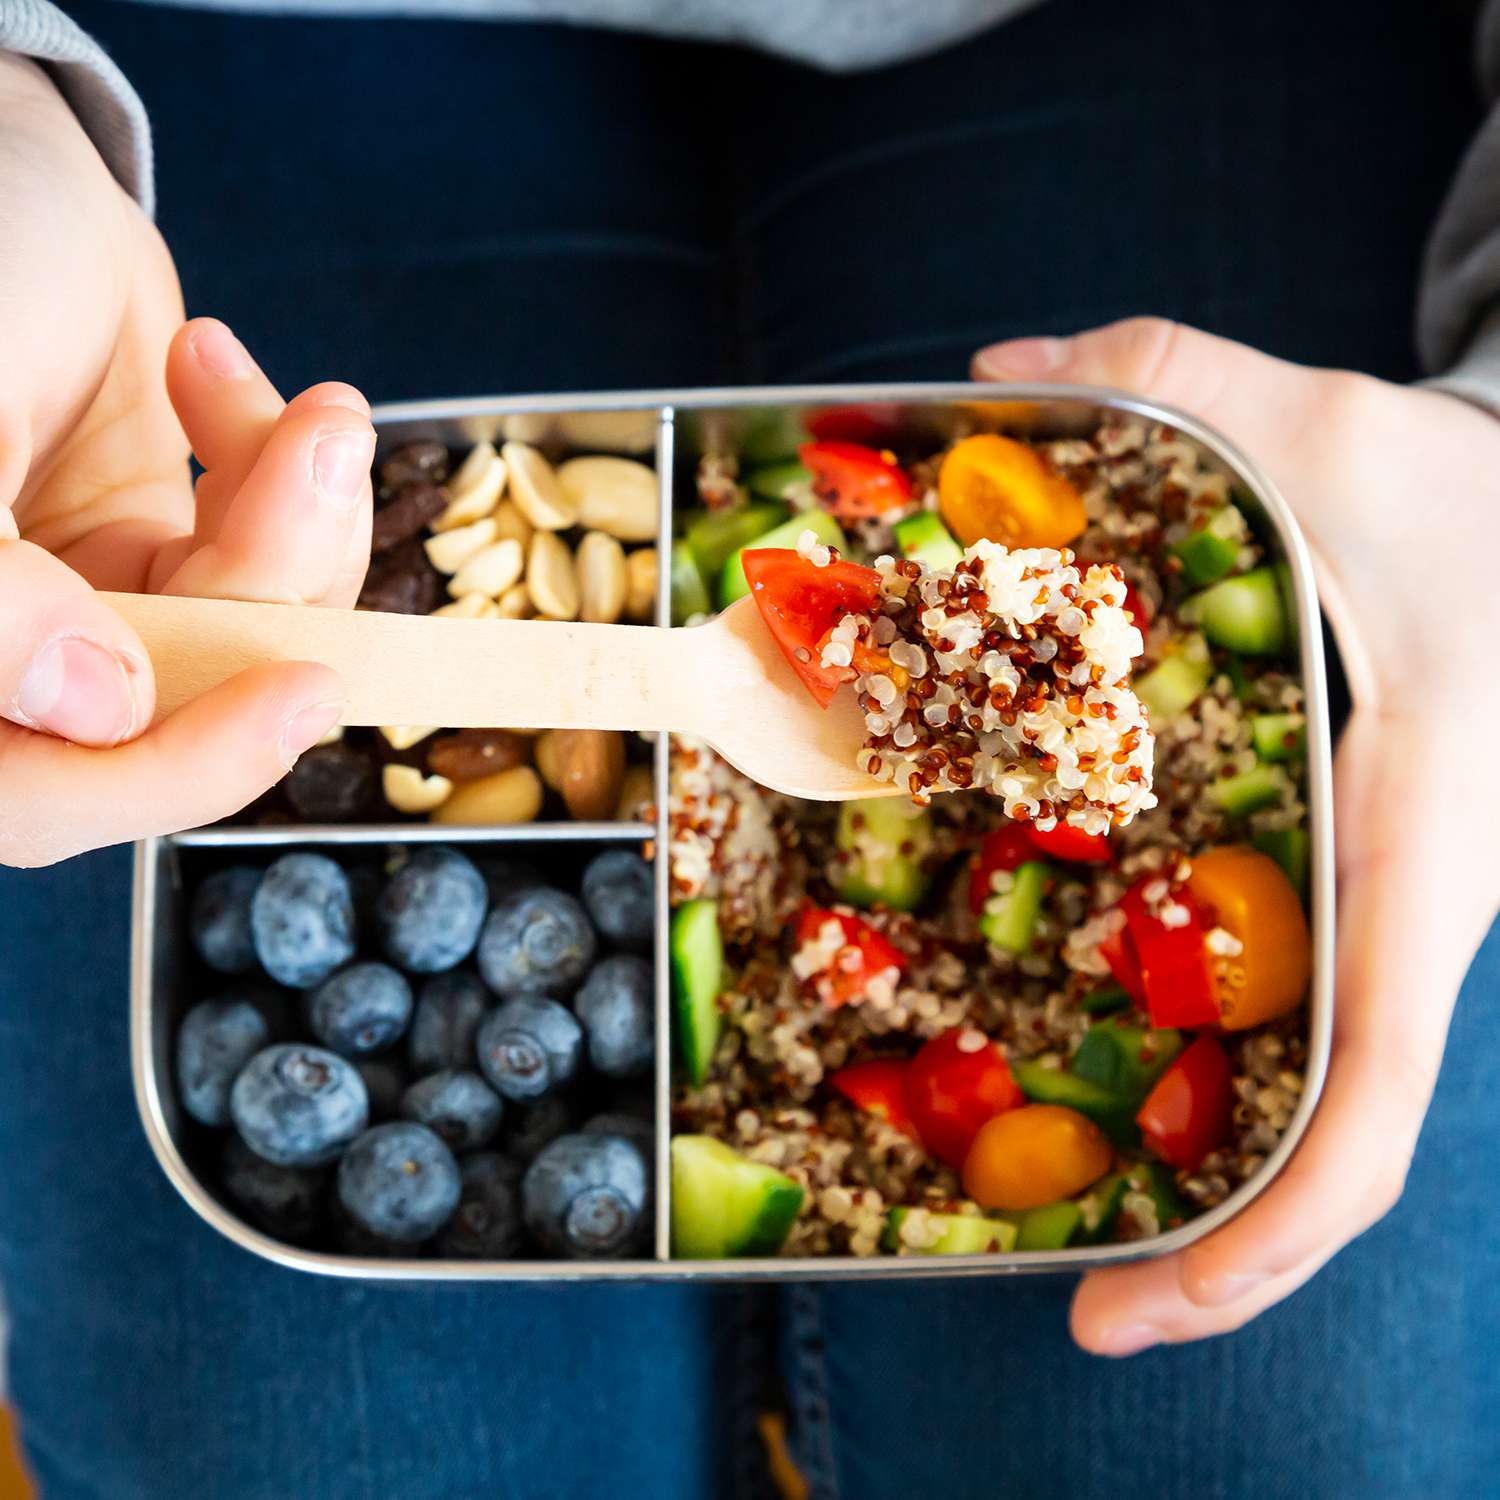 Lunchbox with quinoa salad with tomato and cucumber, blue berry and trail mix